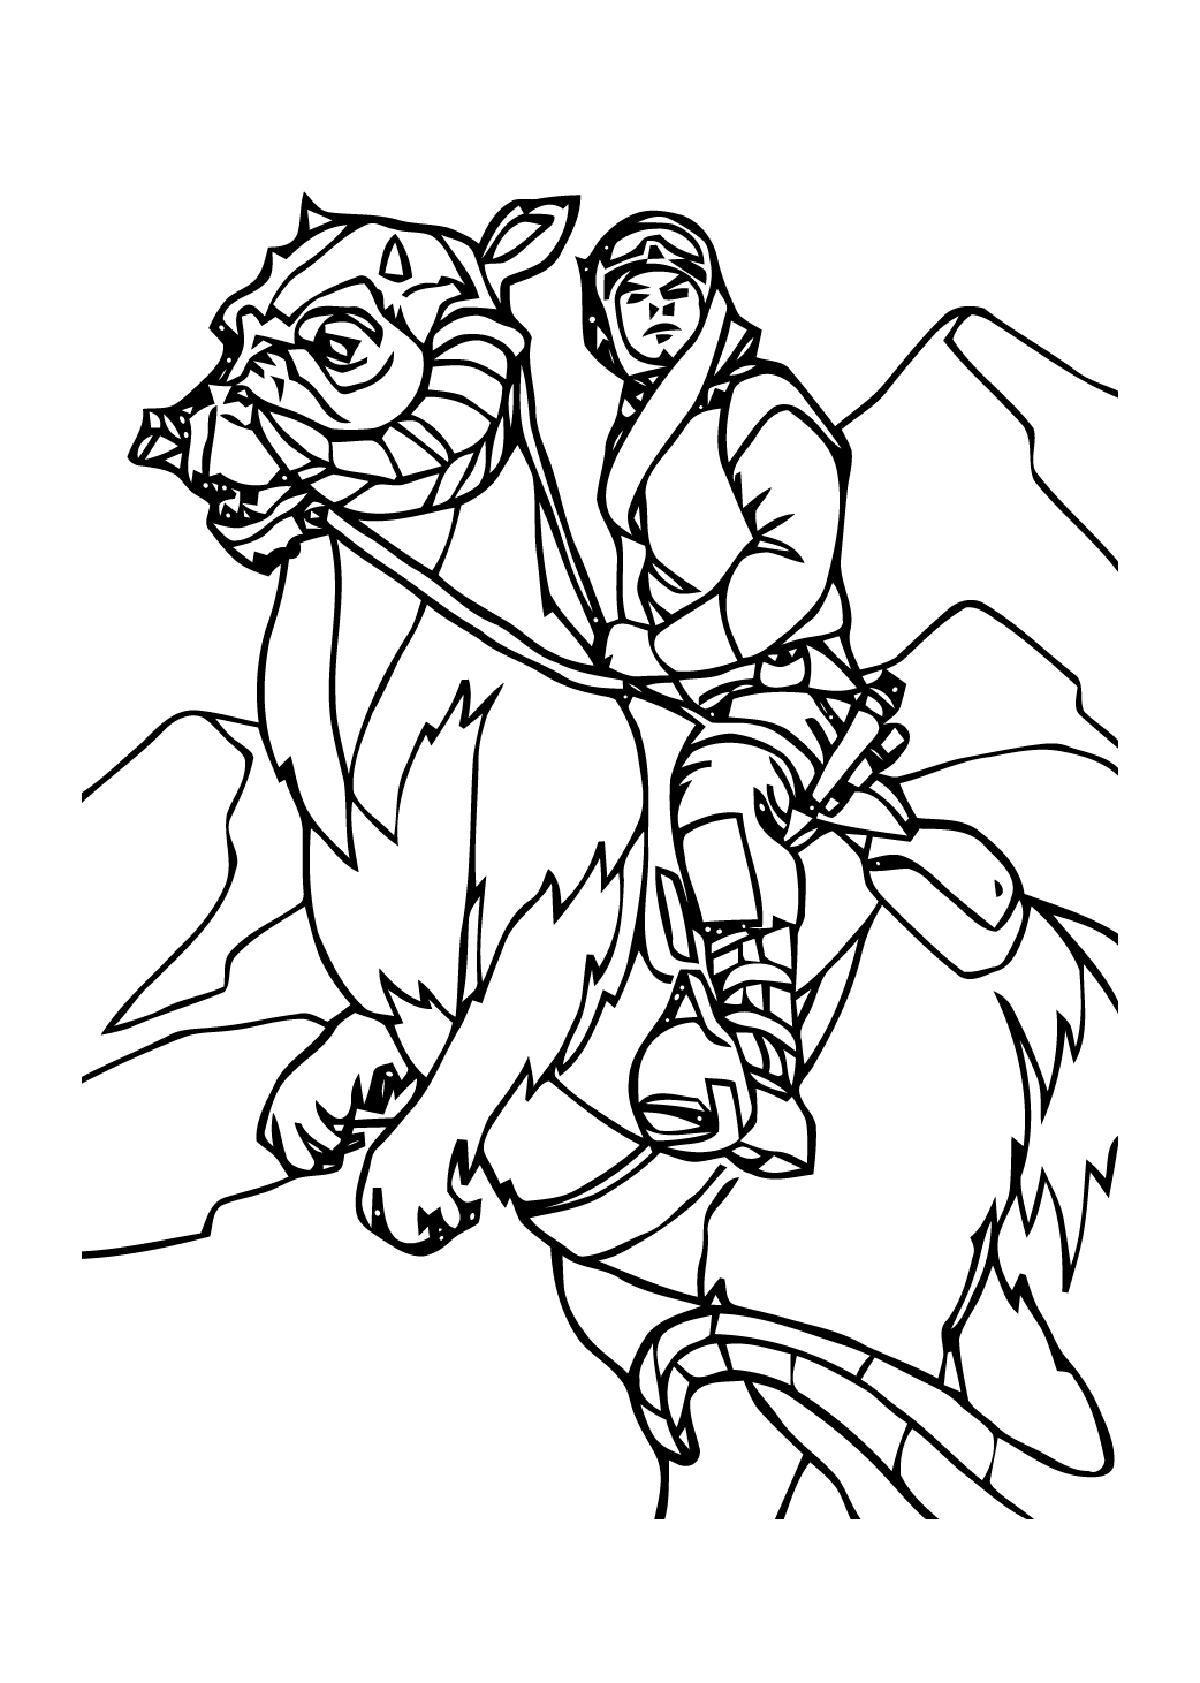 Funny Star Wars coloring page